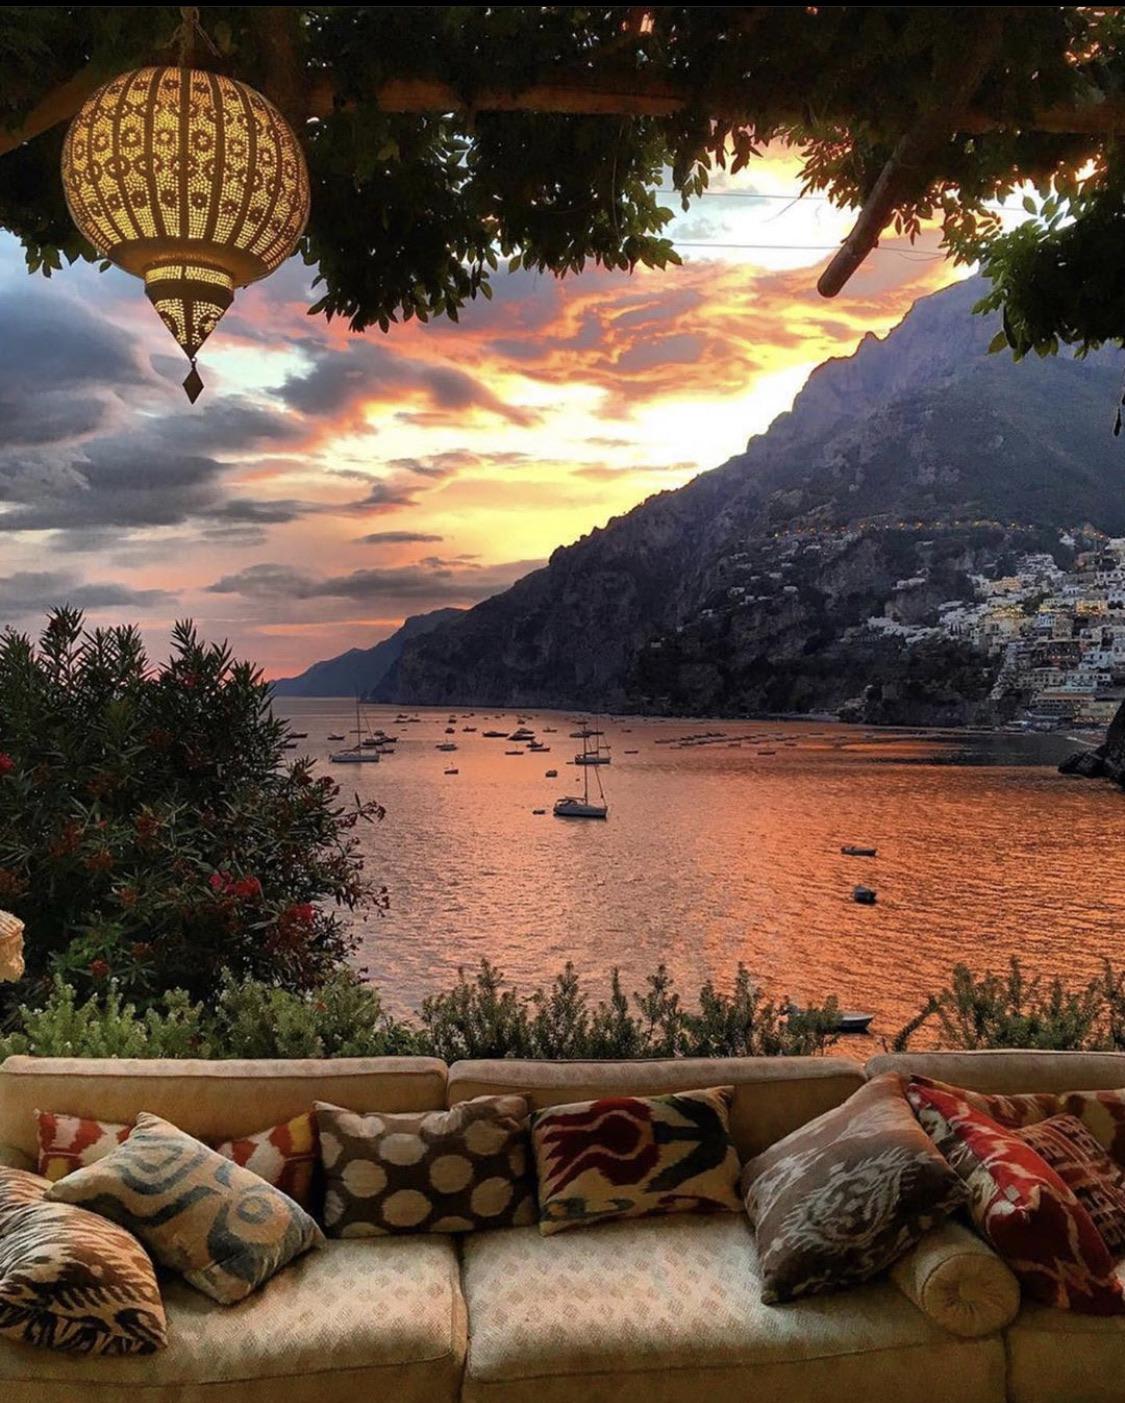 This lounge and view of the Amalfi Coast, Italy